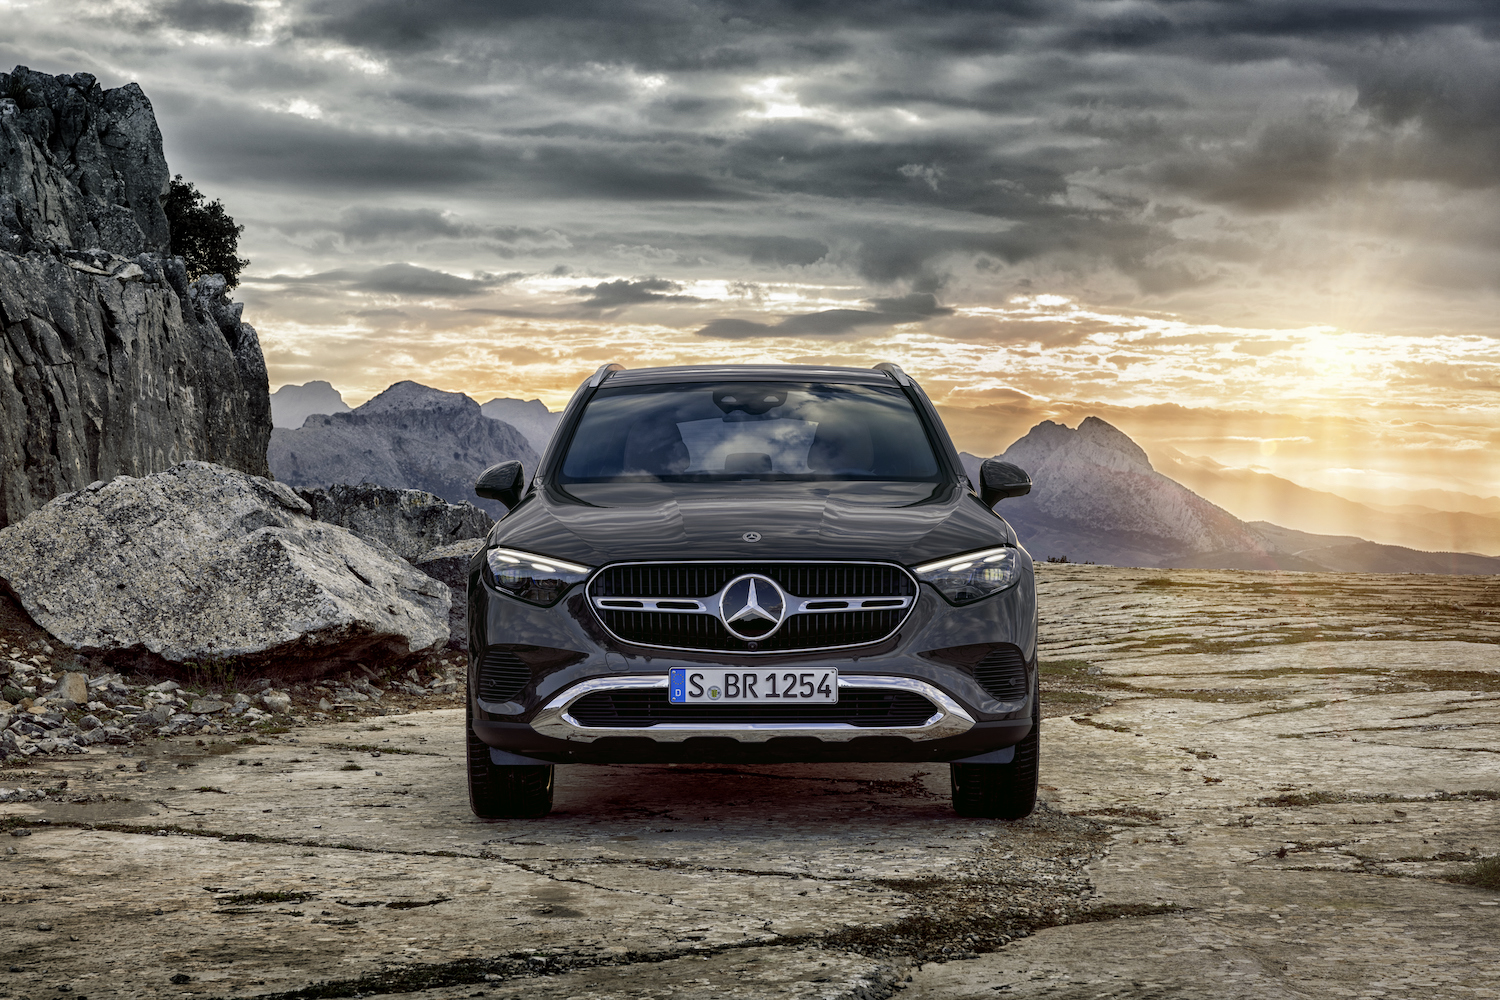 2023 Mercedes-Benz GLC Debuts: Grows In Size, Gets Mild-Hybrid Tech